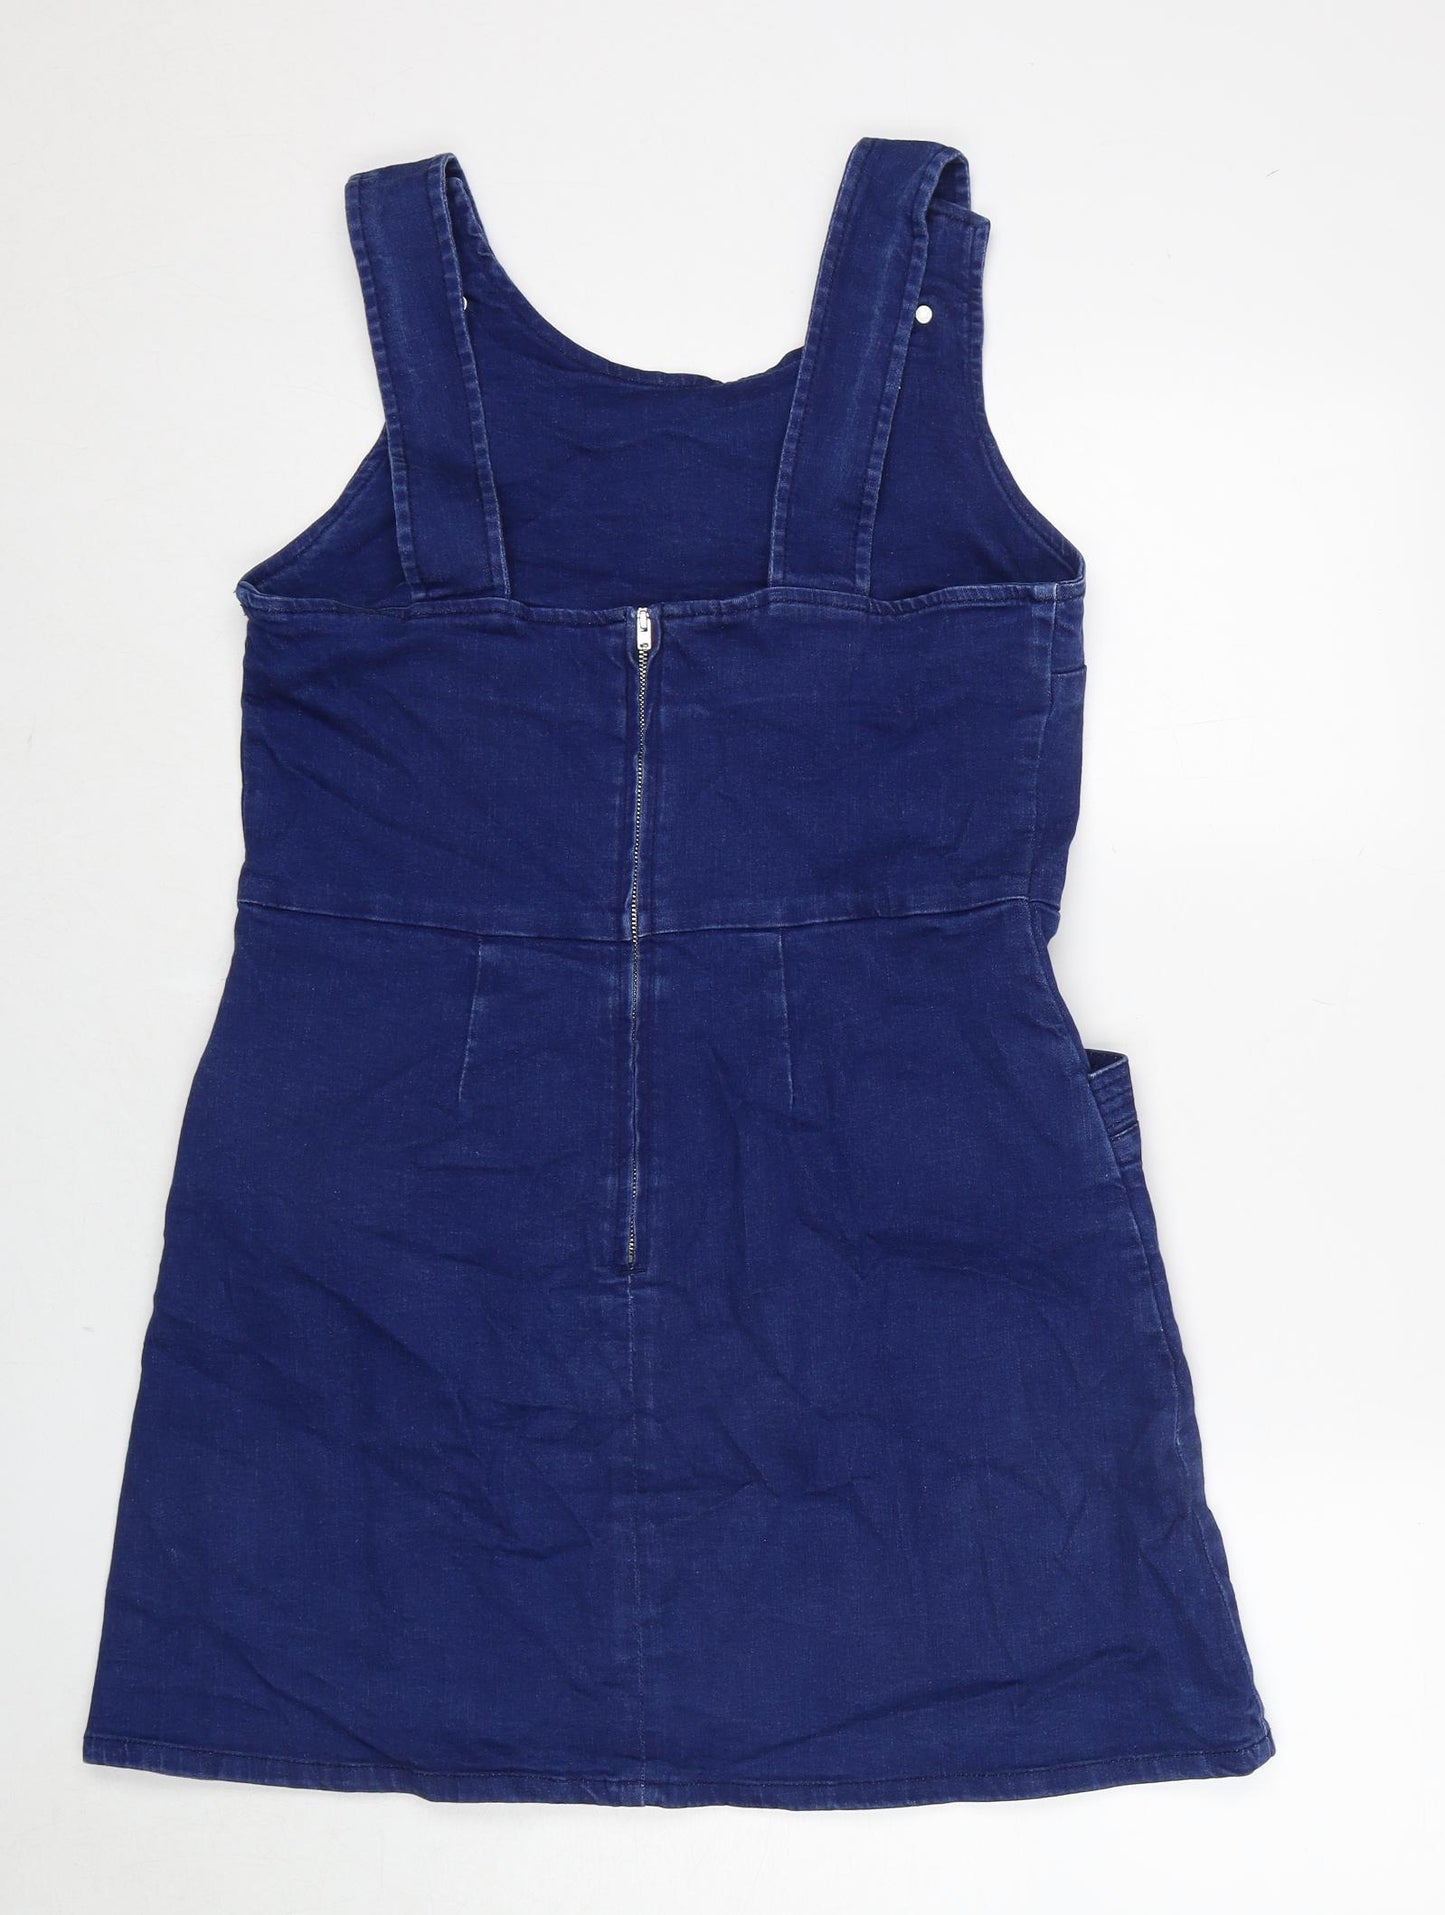 Oasis Womens Blue Cotton Pinafore/Dungaree Dress Size 14 Round Neck Button